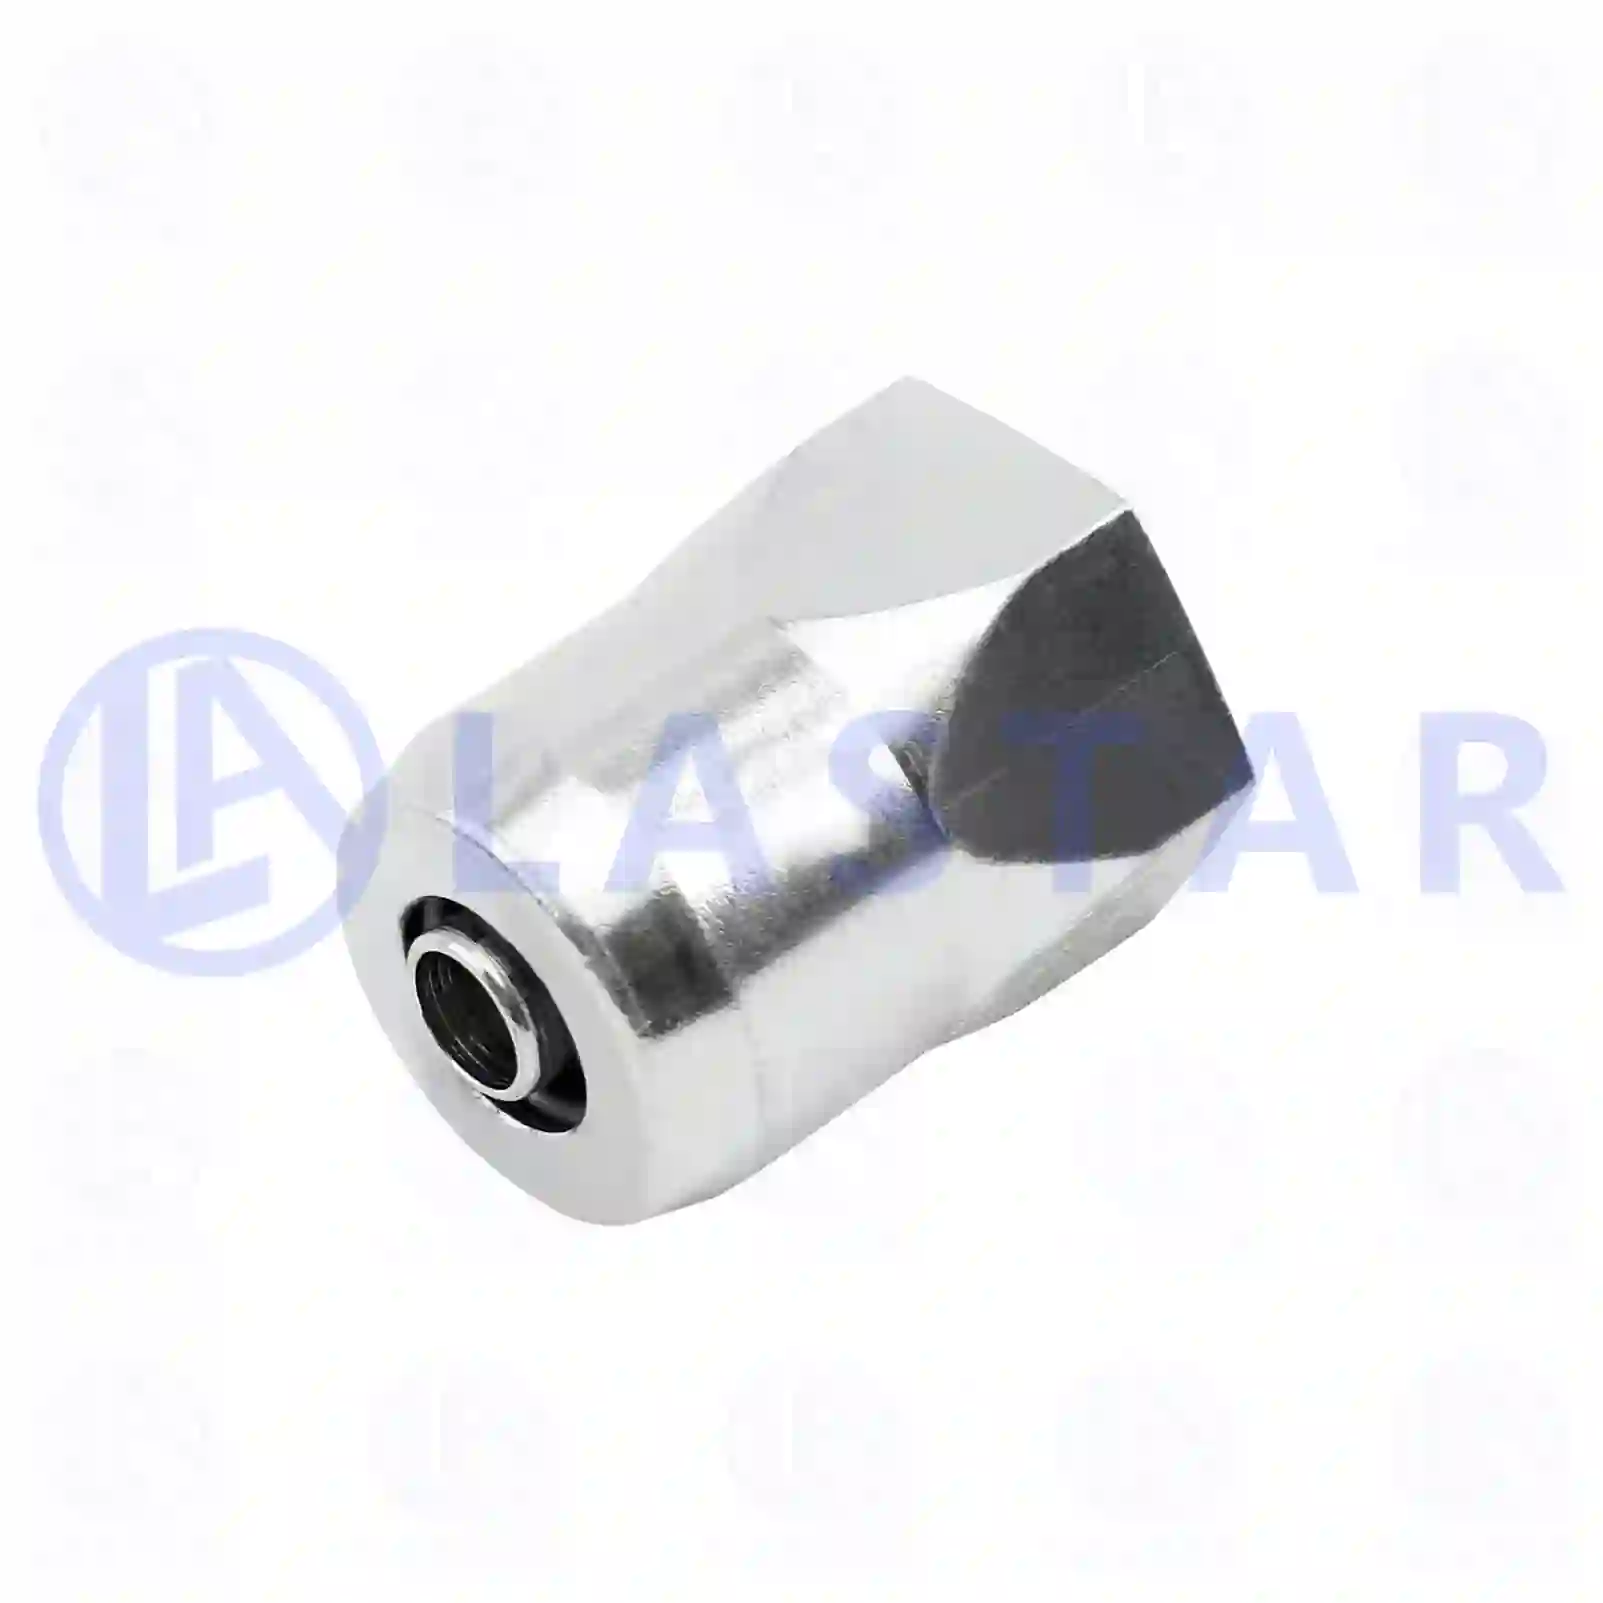 Push-in-connector, 77714121, 1371197, ZG50582-0008 ||  77714121 Lastar Spare Part | Truck Spare Parts, Auotomotive Spare Parts Push-in-connector, 77714121, 1371197, ZG50582-0008 ||  77714121 Lastar Spare Part | Truck Spare Parts, Auotomotive Spare Parts